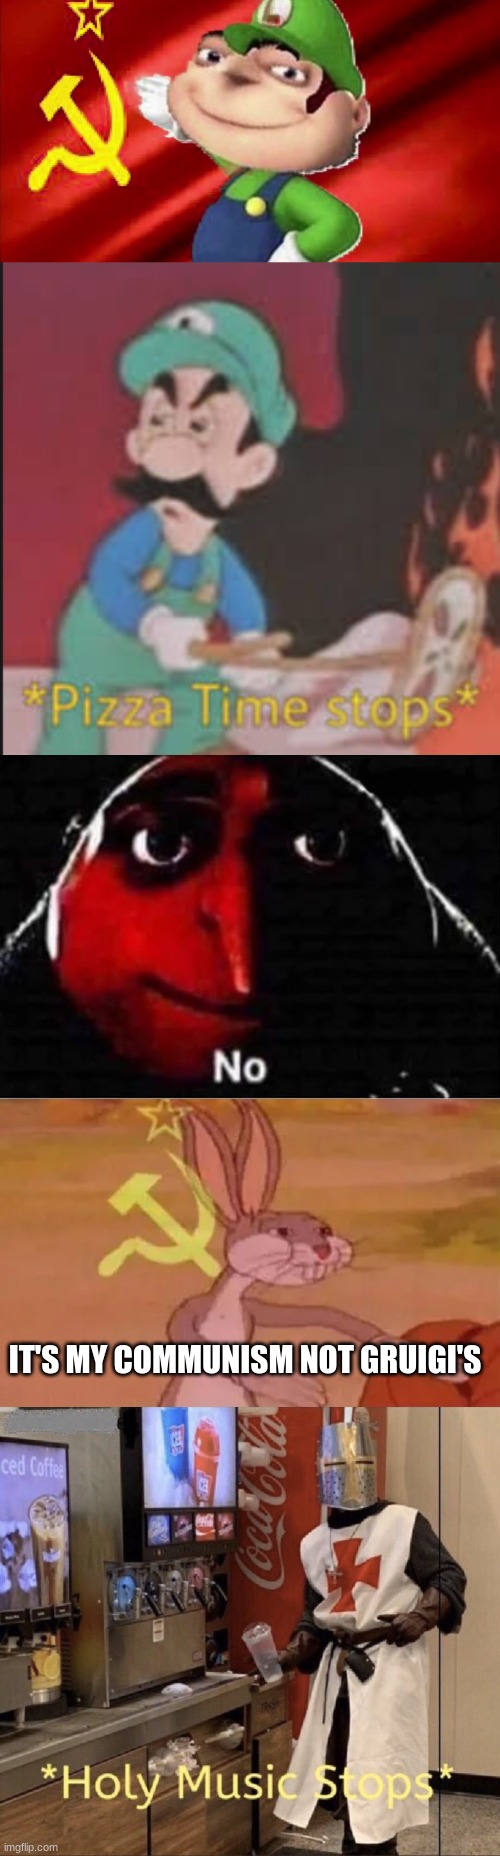 Gruigi is a communist?!?! | IT'S MY COMMUNISM NOT GRUIGI'S | image tagged in gruigi the communist,pizza time stops,gru no,bugs bunny communist,holy music stops | made w/ Imgflip meme maker